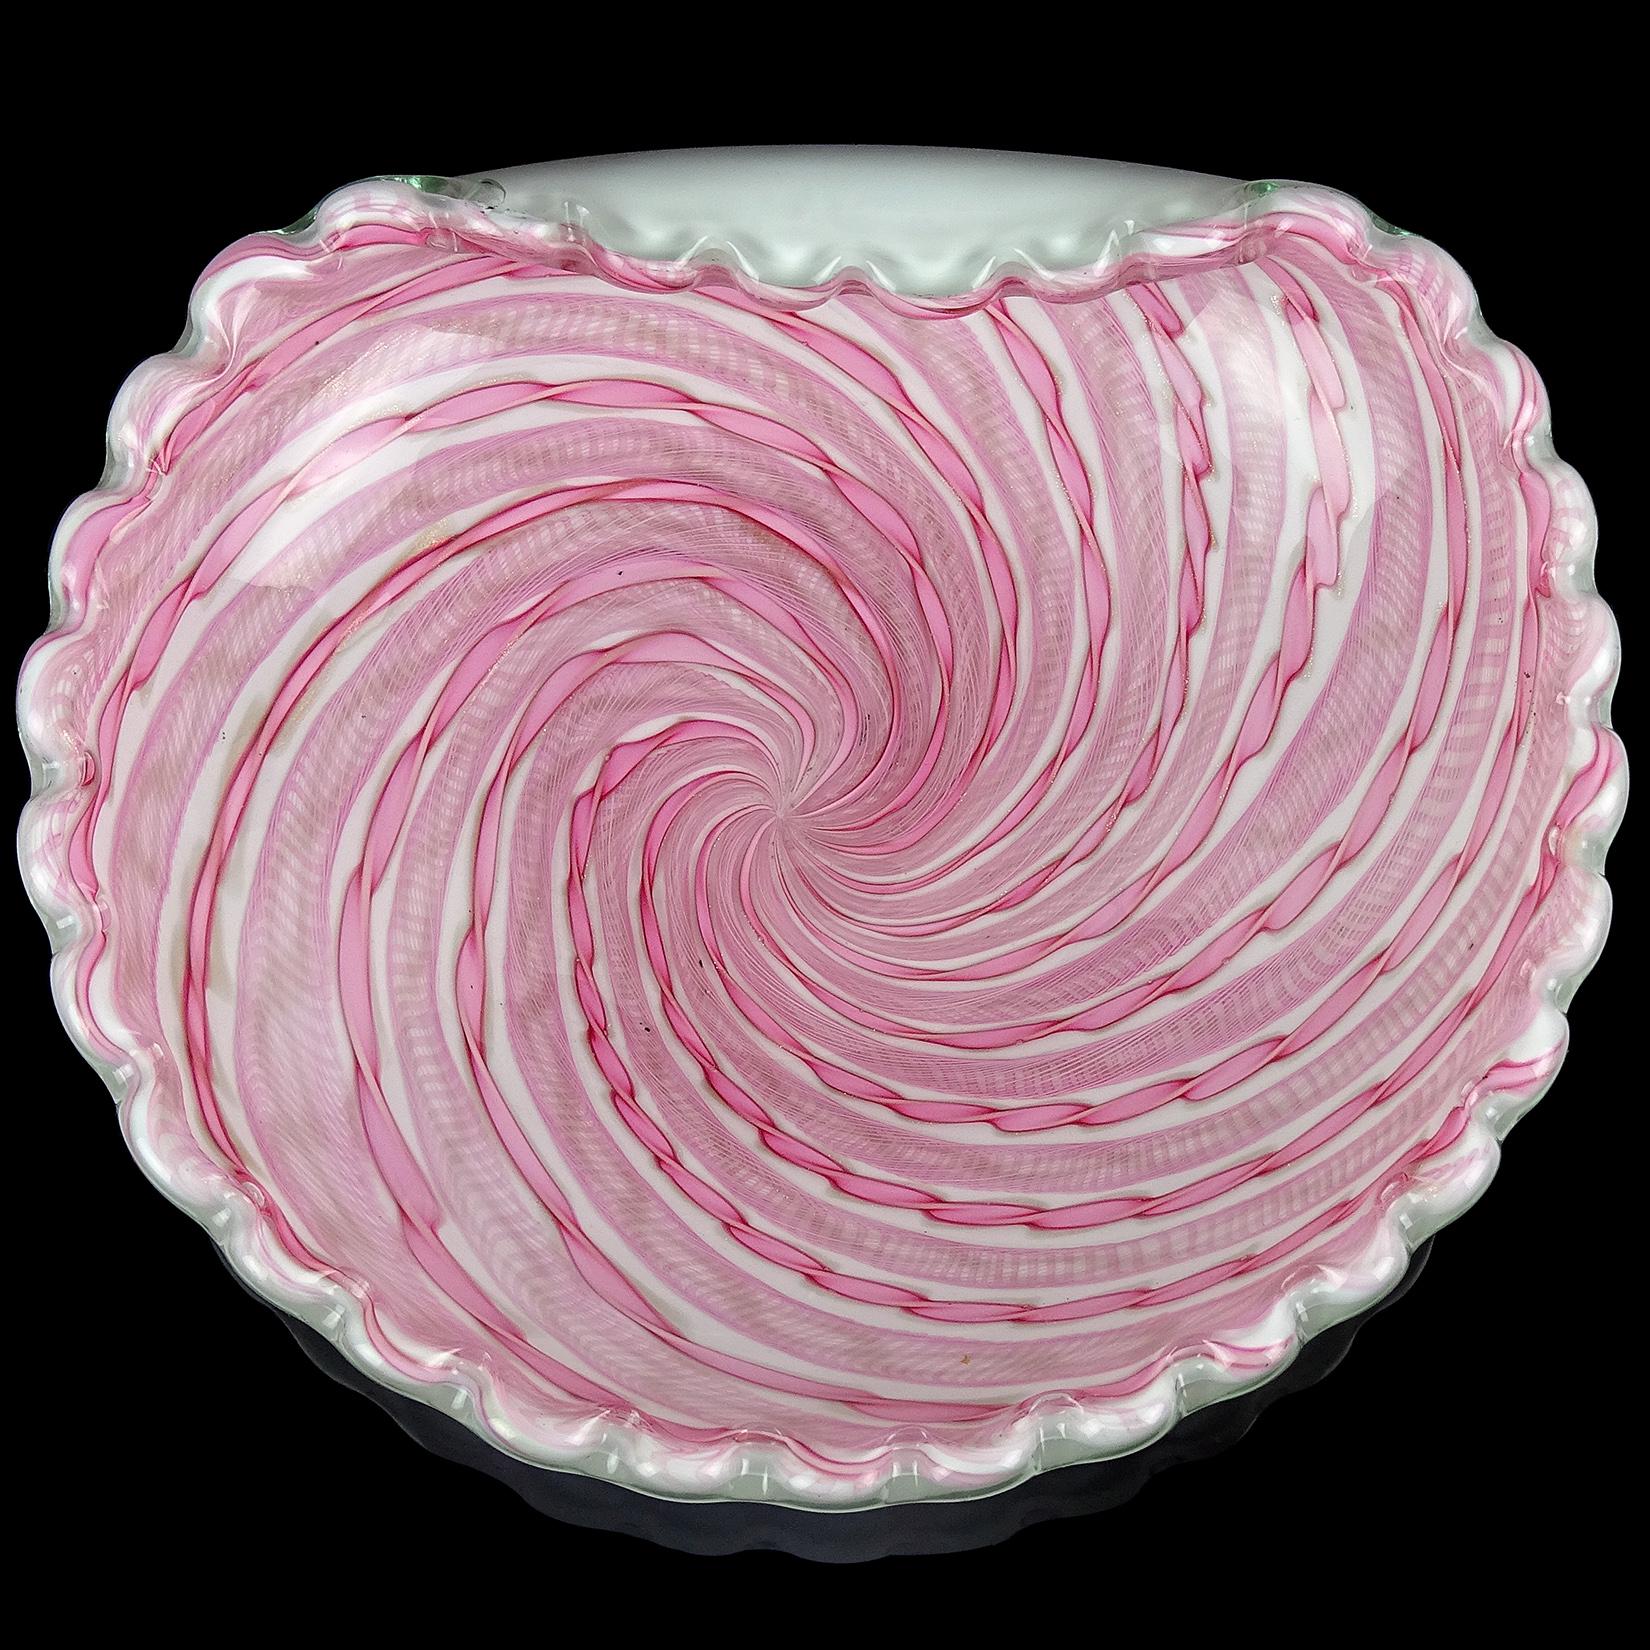 Beautiful Murano hand blown pink ribbons Italian art glass bowl. Documented to the Fratelli Toso company. Made with pink Latticino and pink Zanfirico with copper aventurine twisting ribbons. The bowl is case in white on the outside, making the